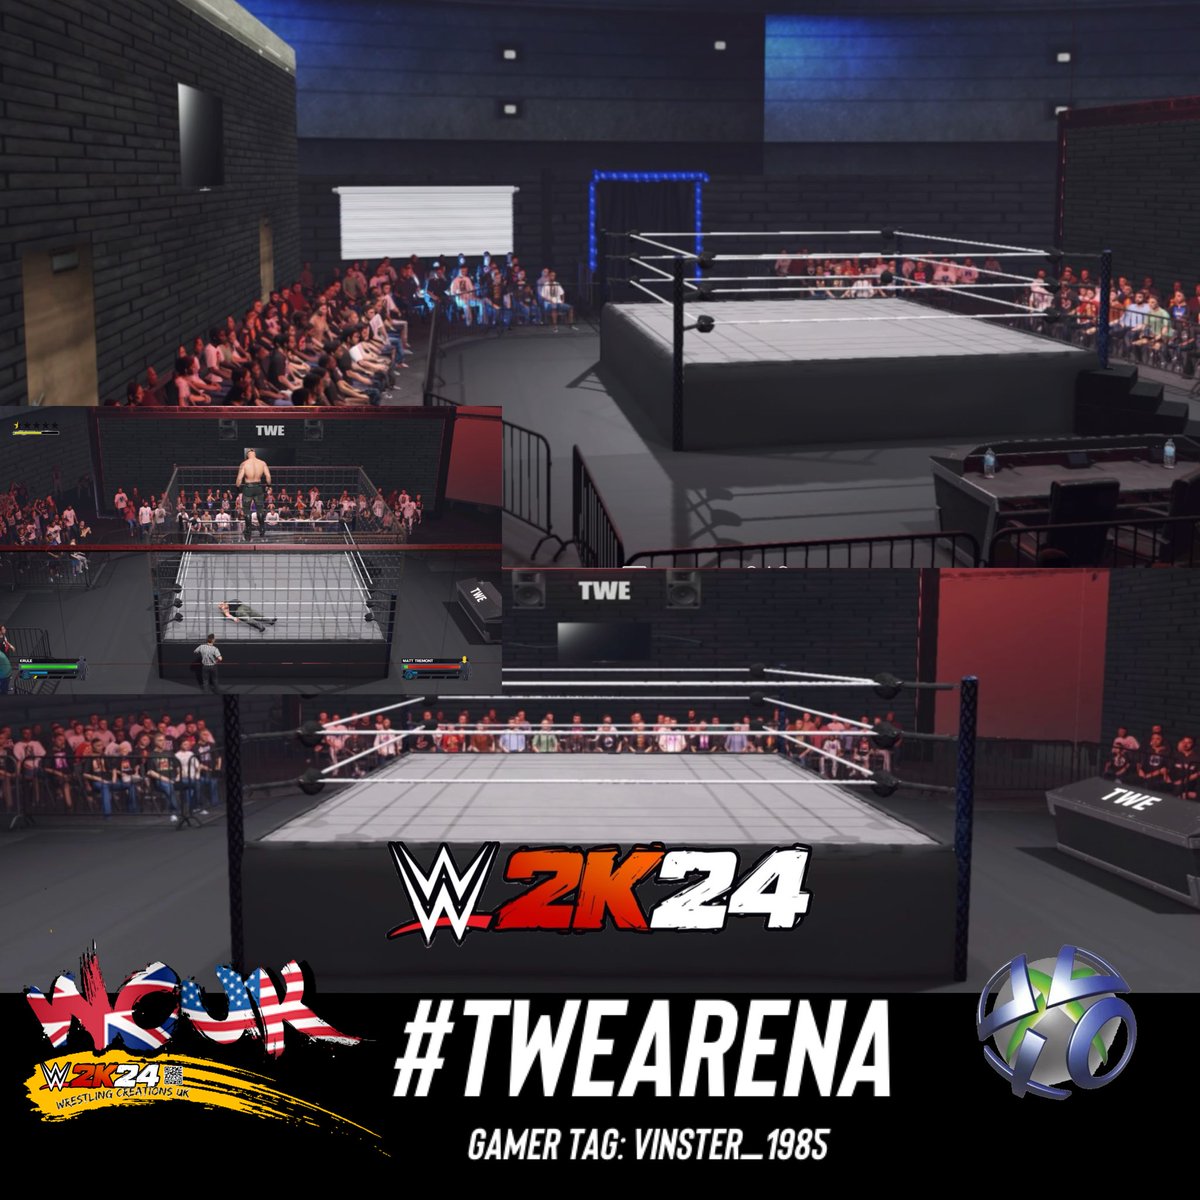 BREAKING NEWS!! Today’s Creation The TWE ARENA is now ready for download on 2k24!! #TWEARENA #wrestlingcreationsuk #twearena #caw #wwe2k24 #playstayion #xbox